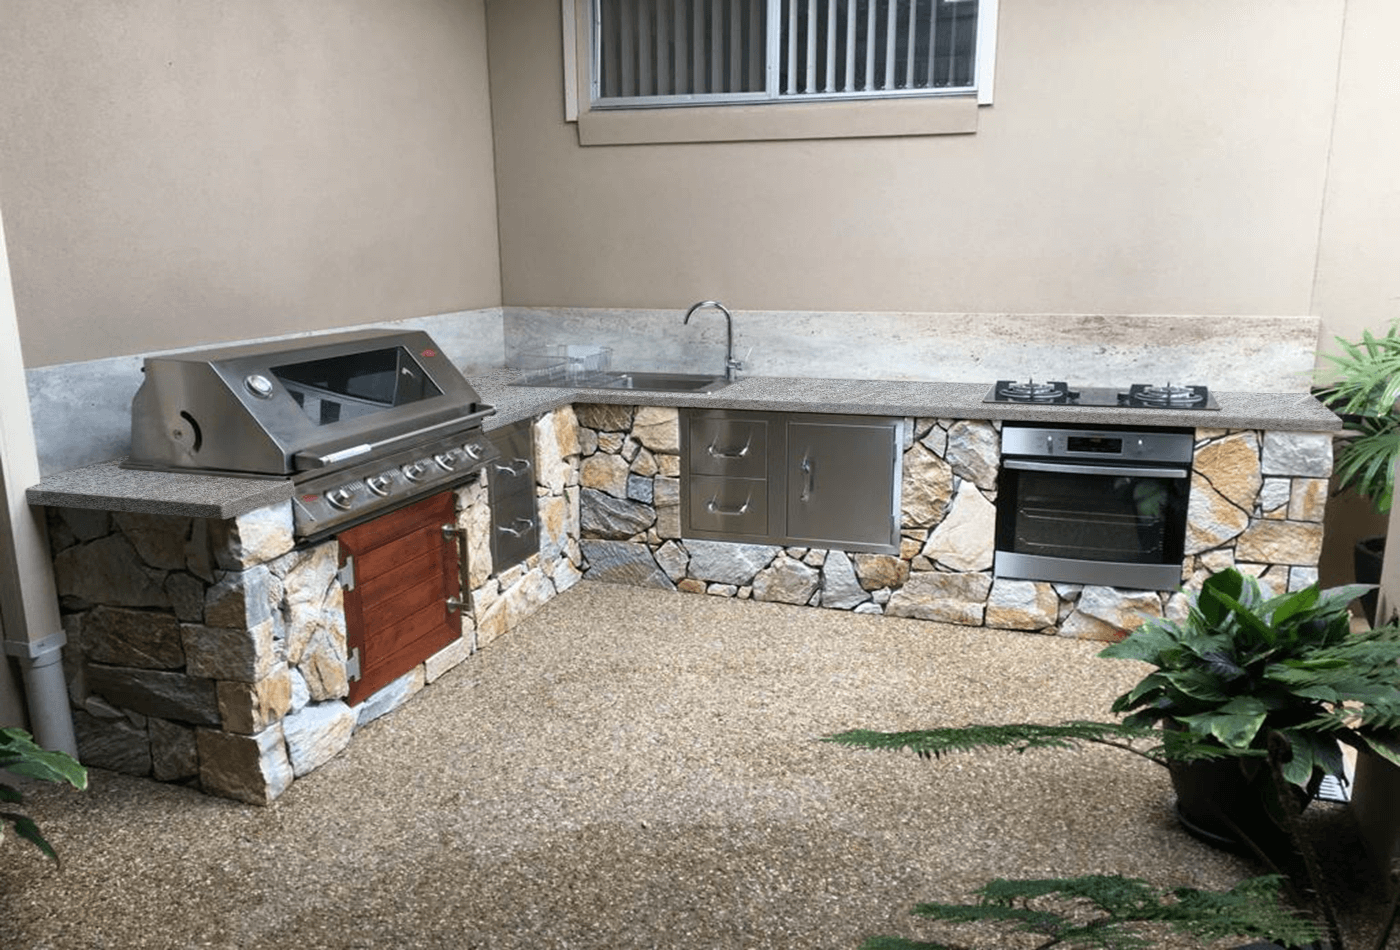 Outdoor Kitchen is Convenient and Desirable